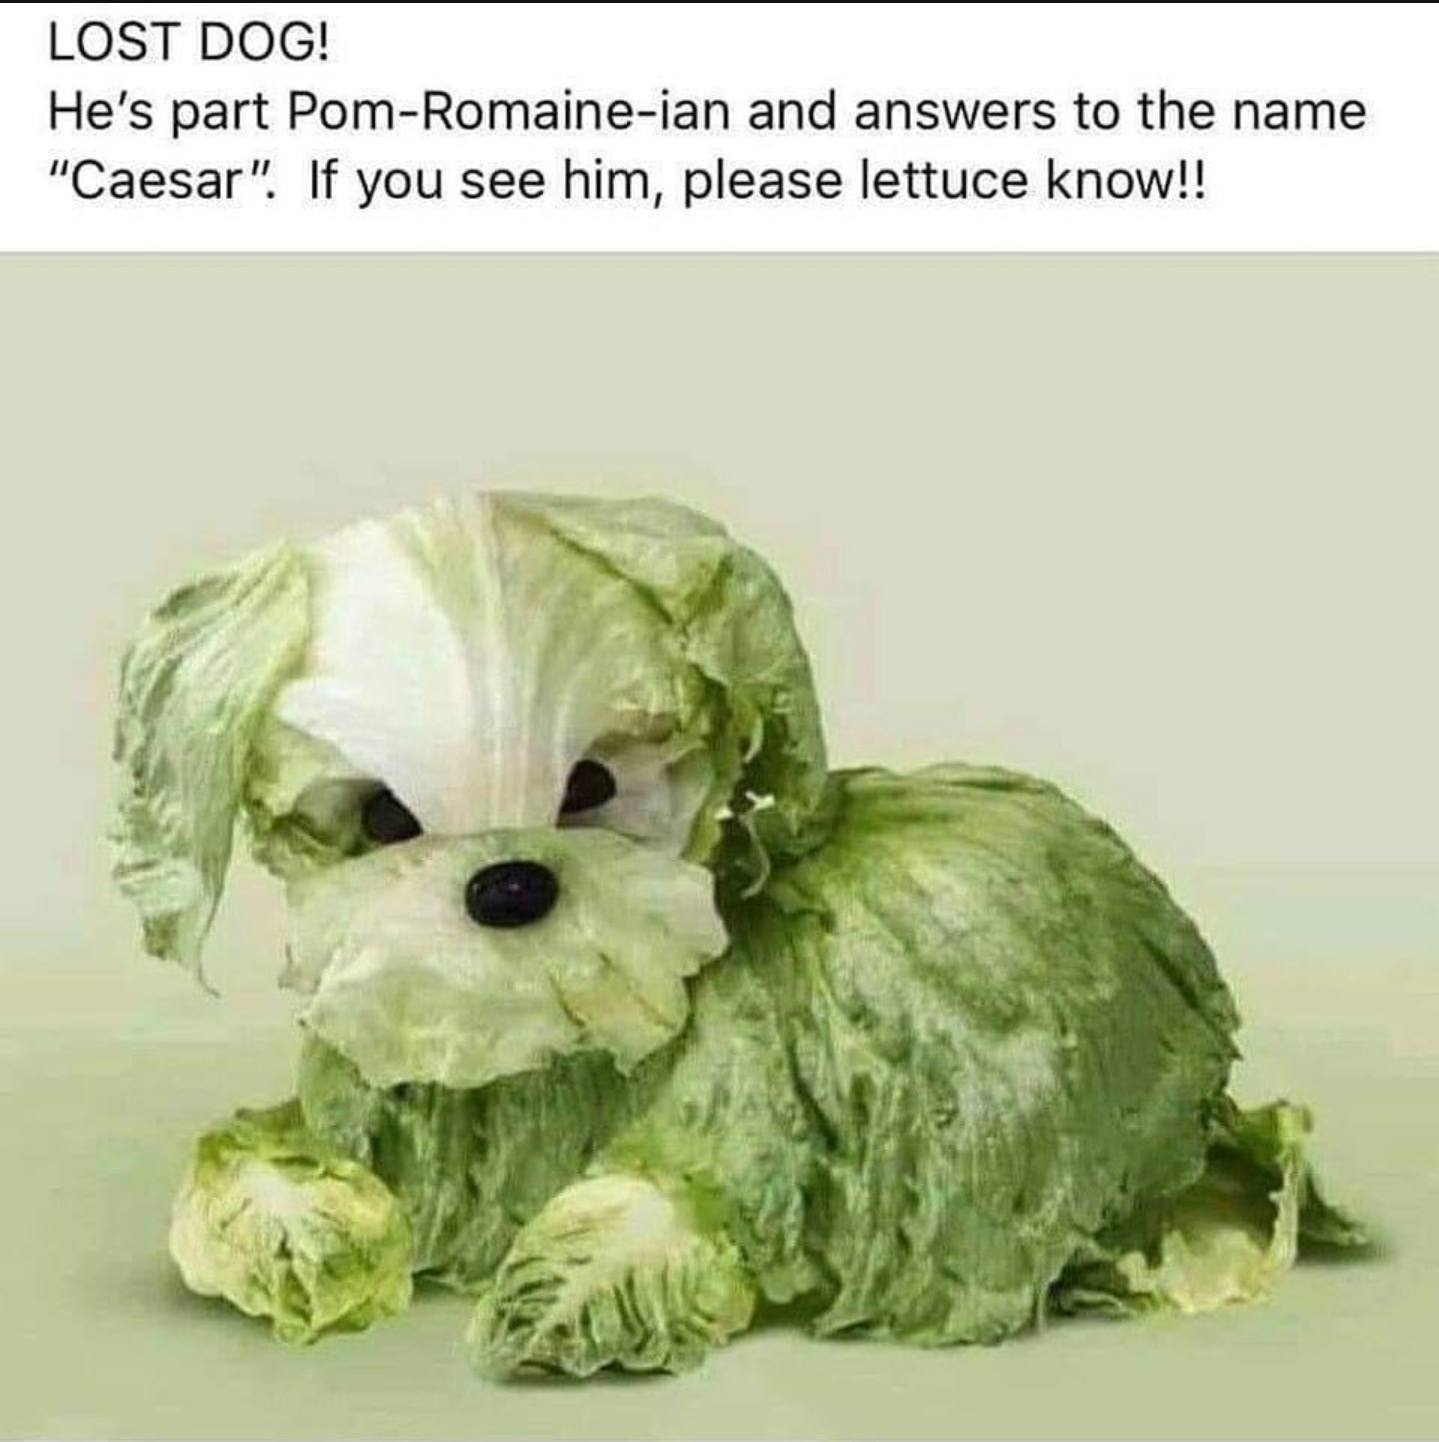 if you see this dog lettuce know - Lost Dog! He's part PomRomaineian and answers to the name "Caesar". If you see him, please lettuce know!!